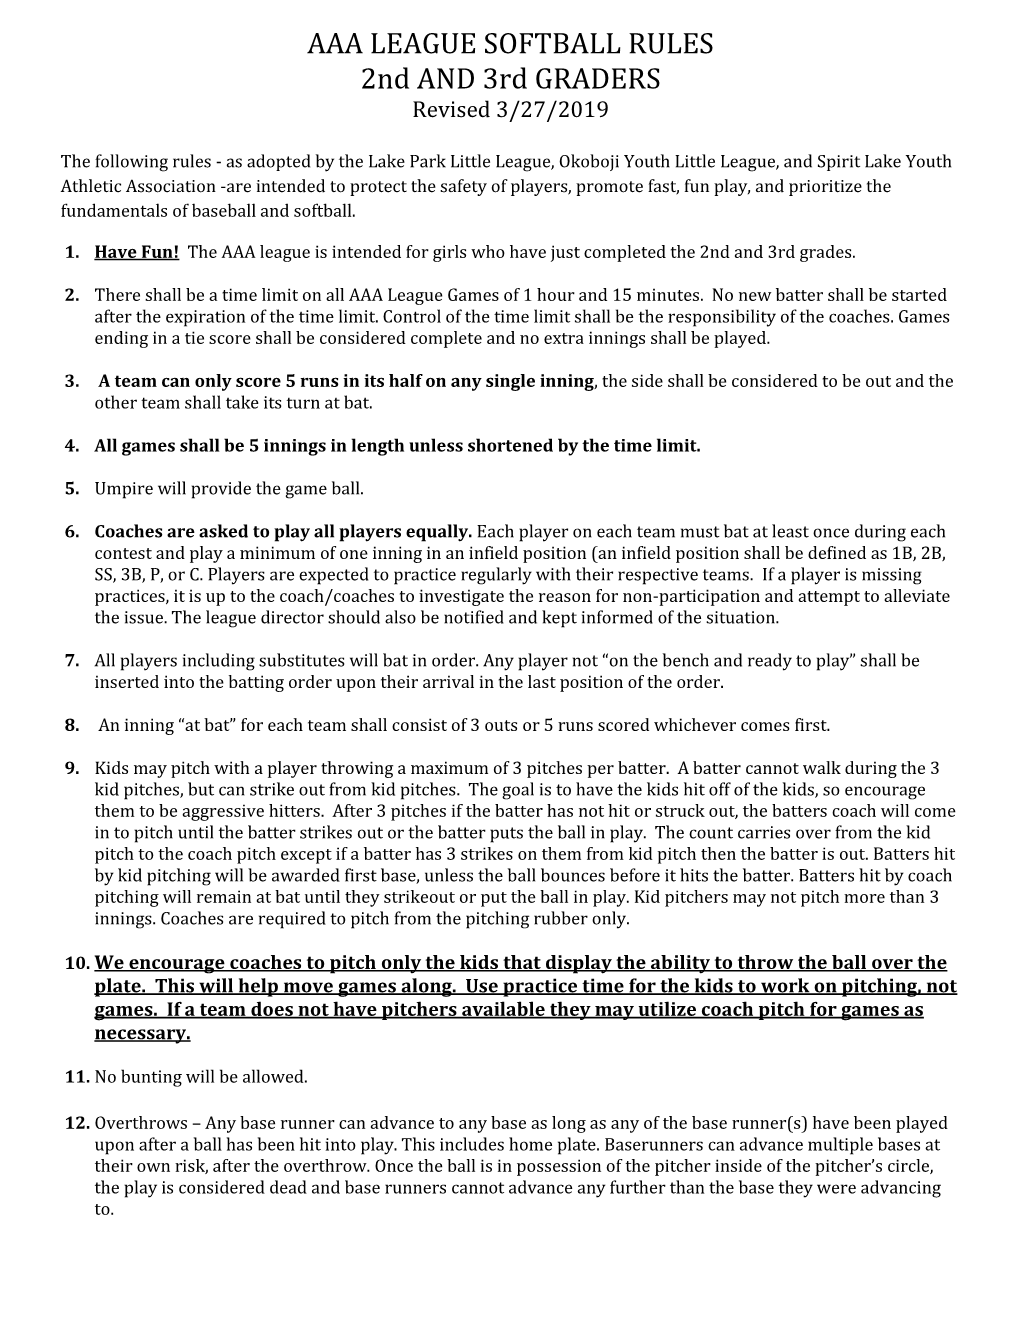 AAA LEAGUE SOFTBALL RULES 2Nd and 3Rd GRADERS Revised 3/27/2019